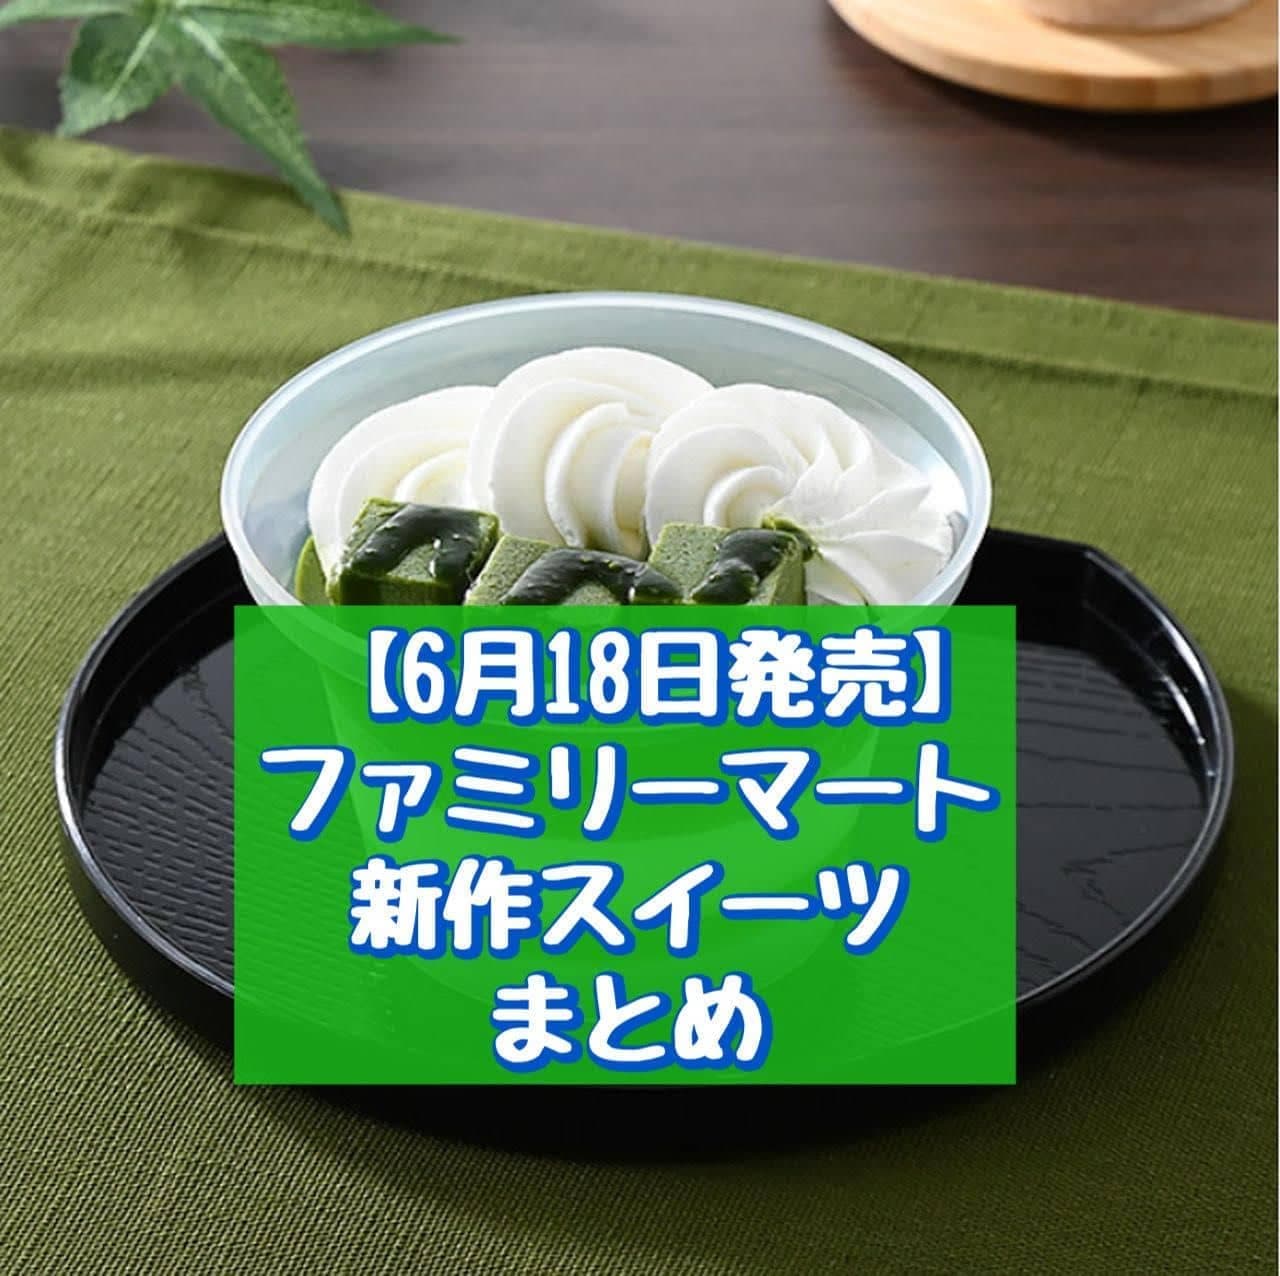 FamilyMart's new sweet products will be on sale on June 18.